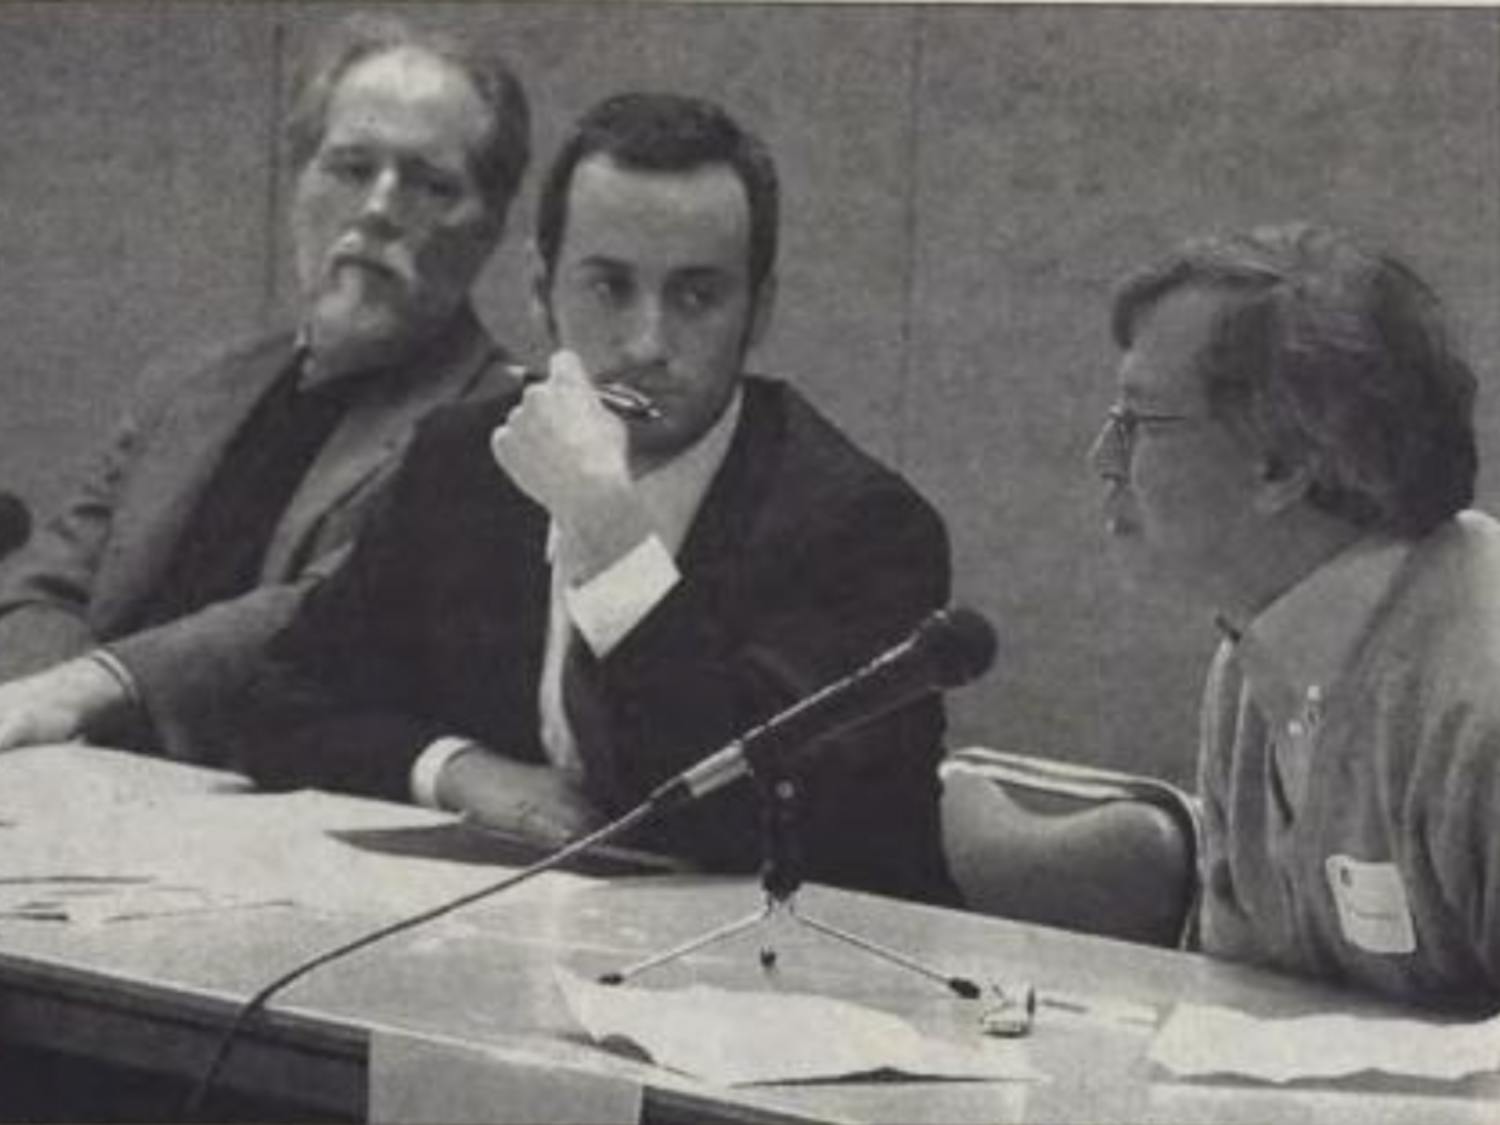 Stephen Miller, center, spoke at a 2007 Martin Luther King, Jr. Day panel on affirmative action, along with professor of political science Michael Gillespie, left, and&nbsp;Erwin Chemerisky, right, who was then a law professor at Duke.&nbsp;